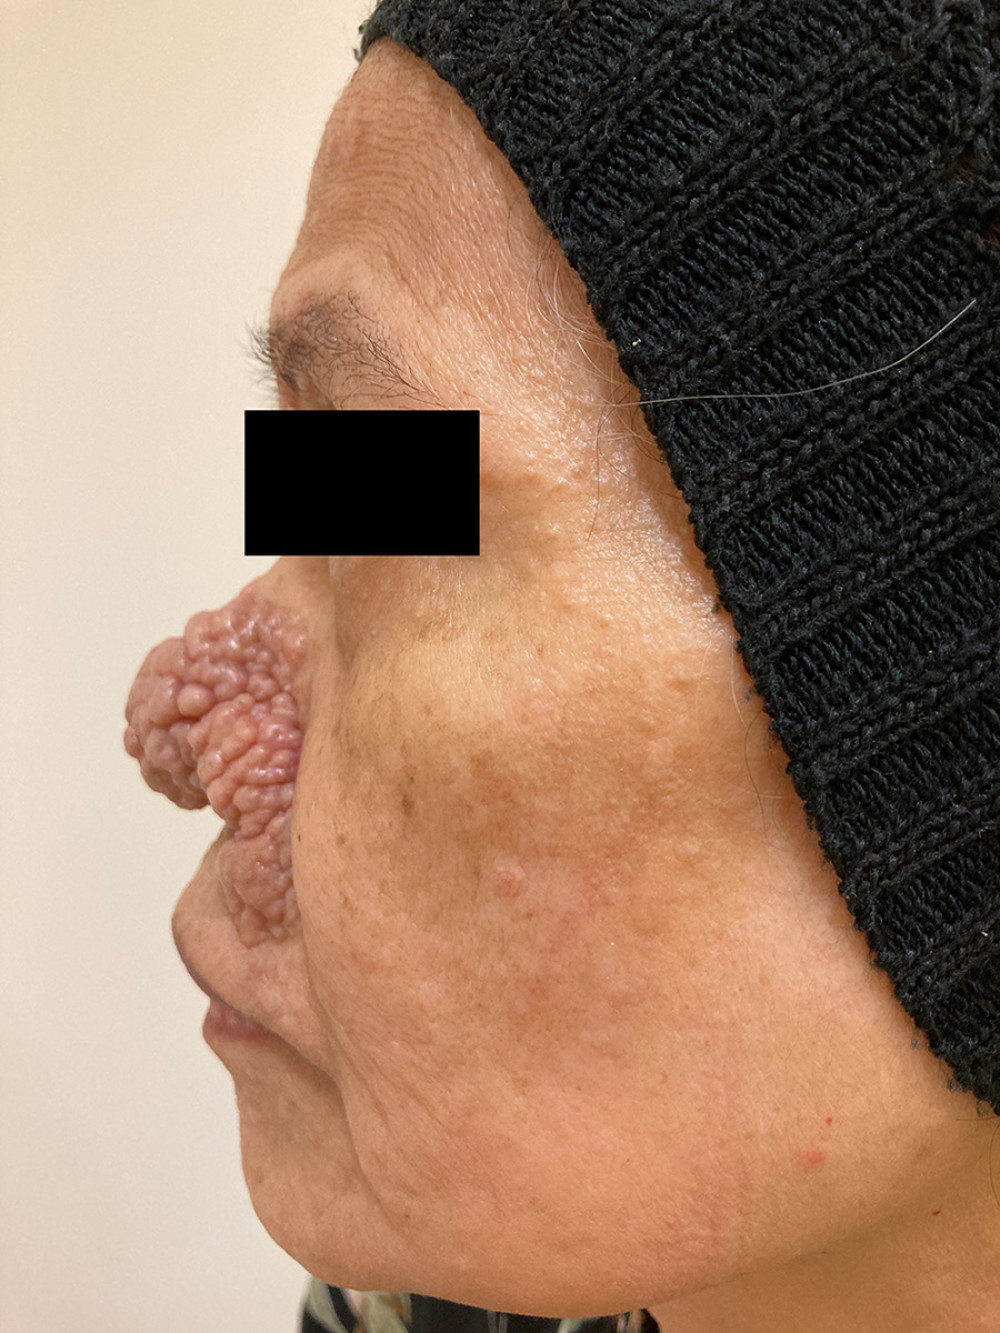 Numerous skin-colored papules on the left side of the patient’s face, most prominent on the nose.